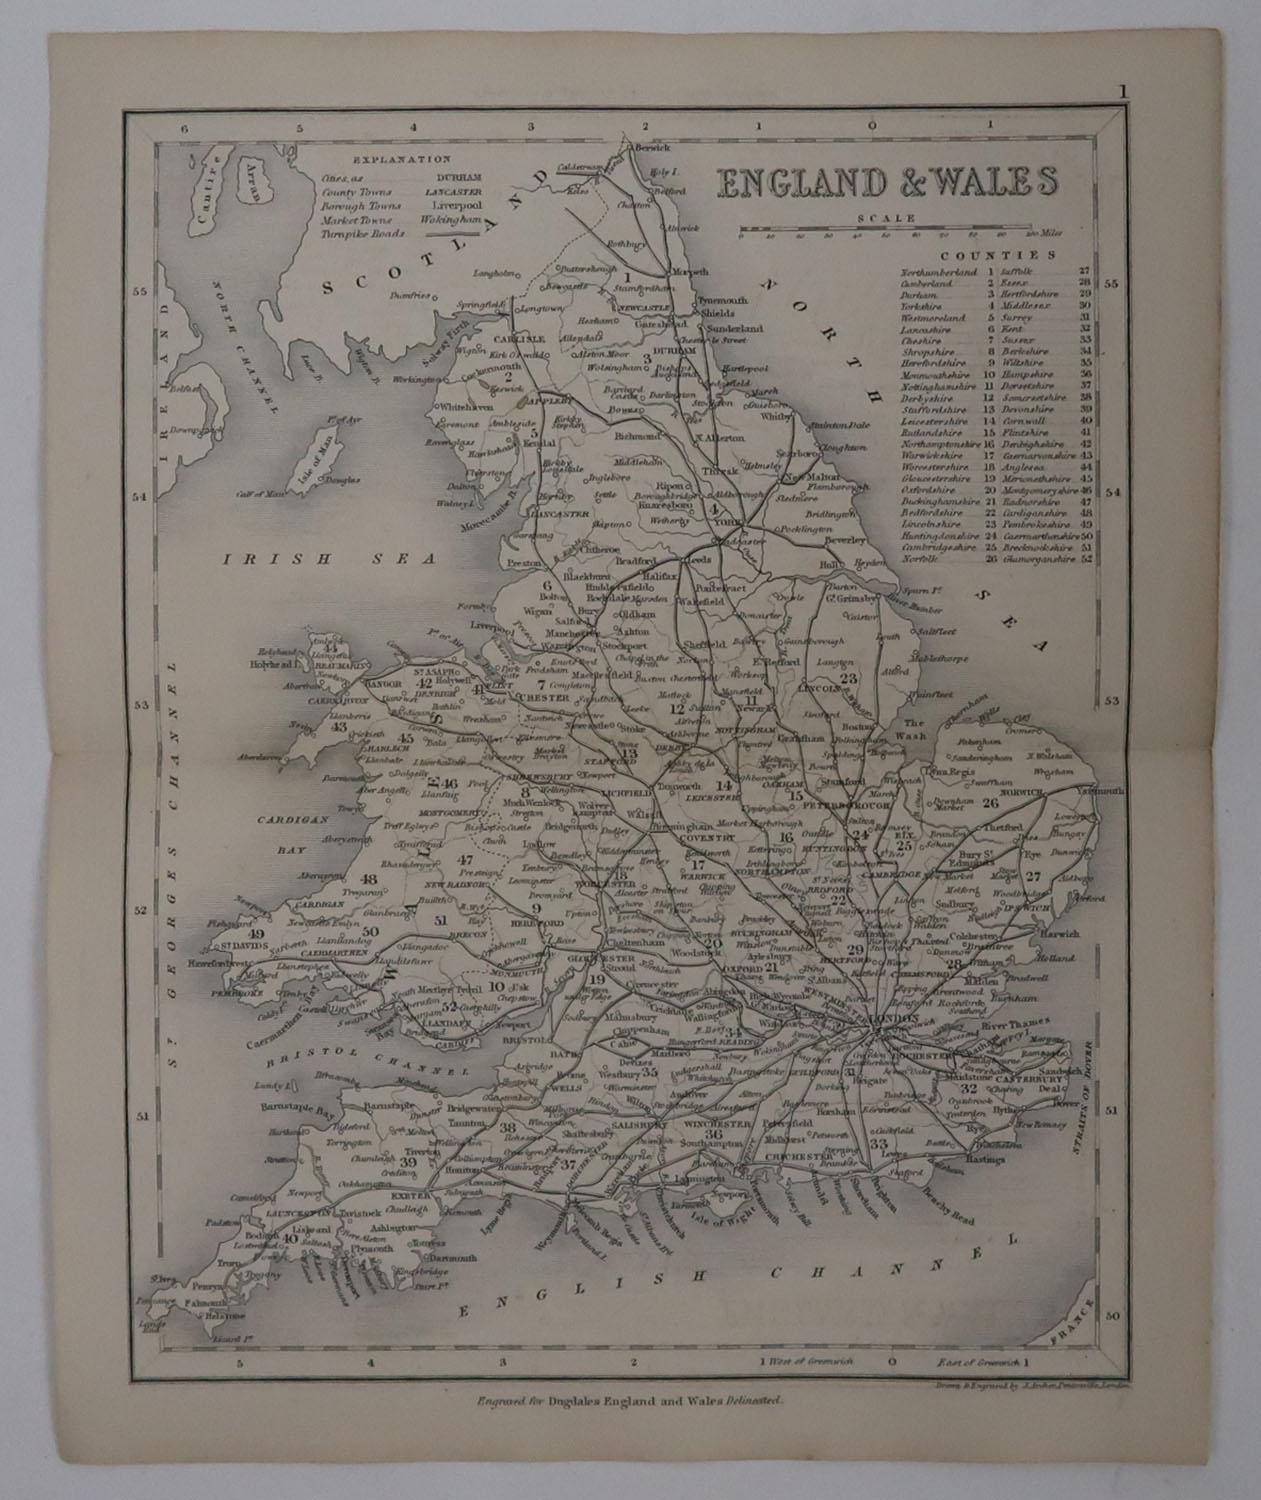 Other Original Antique Map of England and Wales by J.Archer, circa 1840